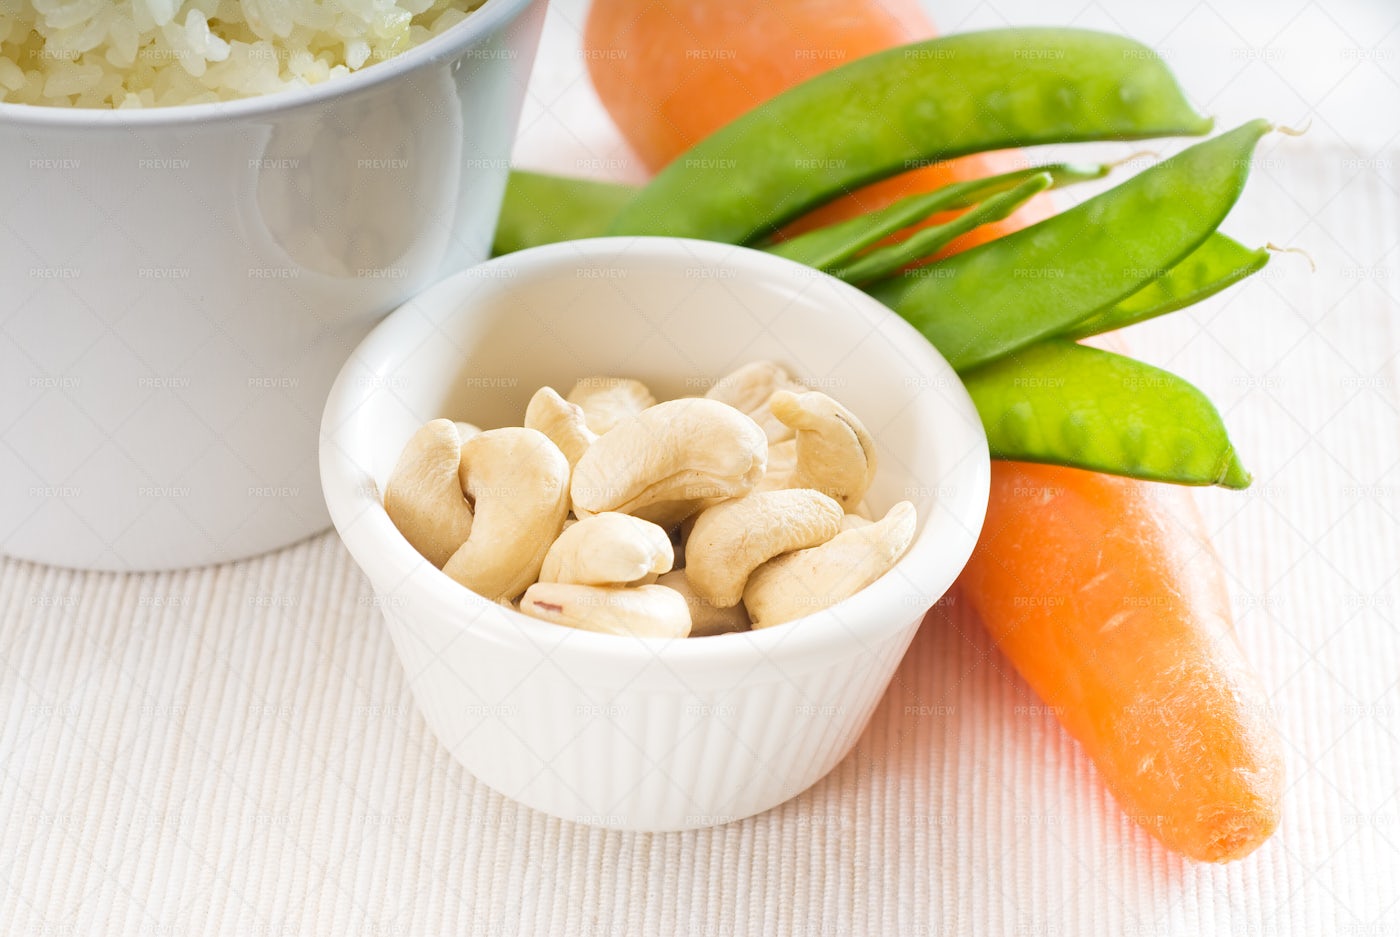 Cashew Nuts And Vegetables: Stock Photos